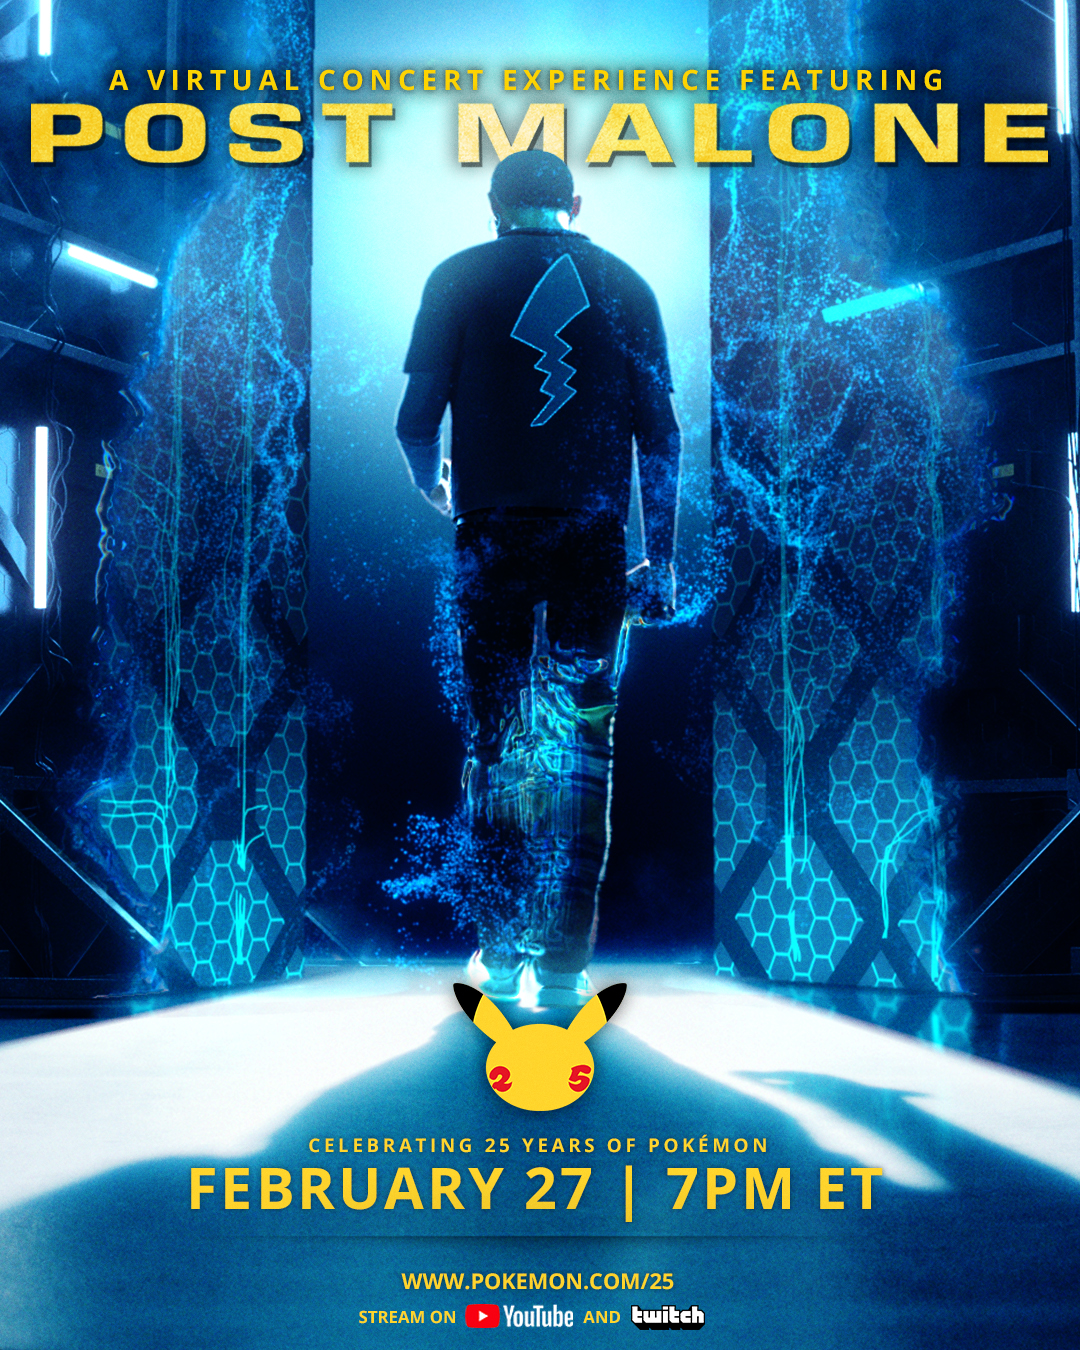 Post Malone Pokémon Virtual Concert Start Time and How to Watch Online